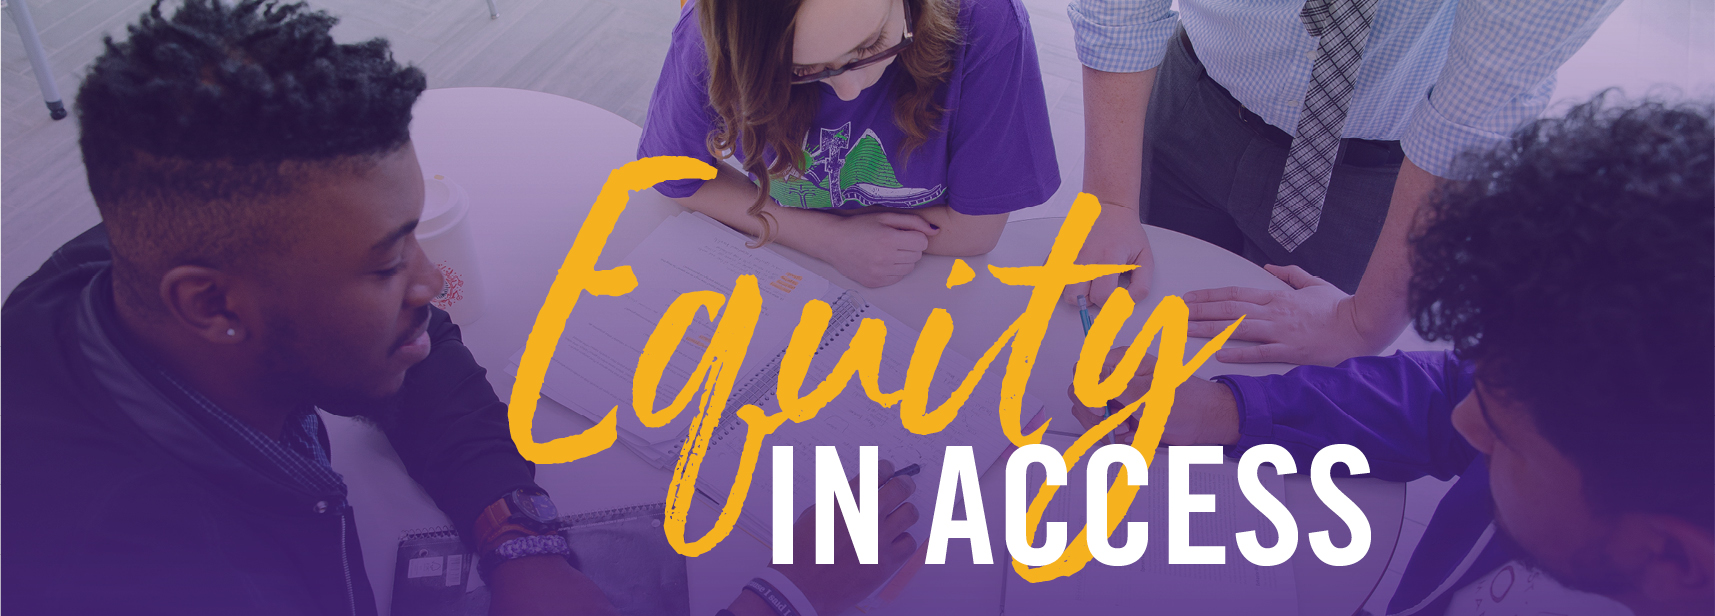 Equity in Access